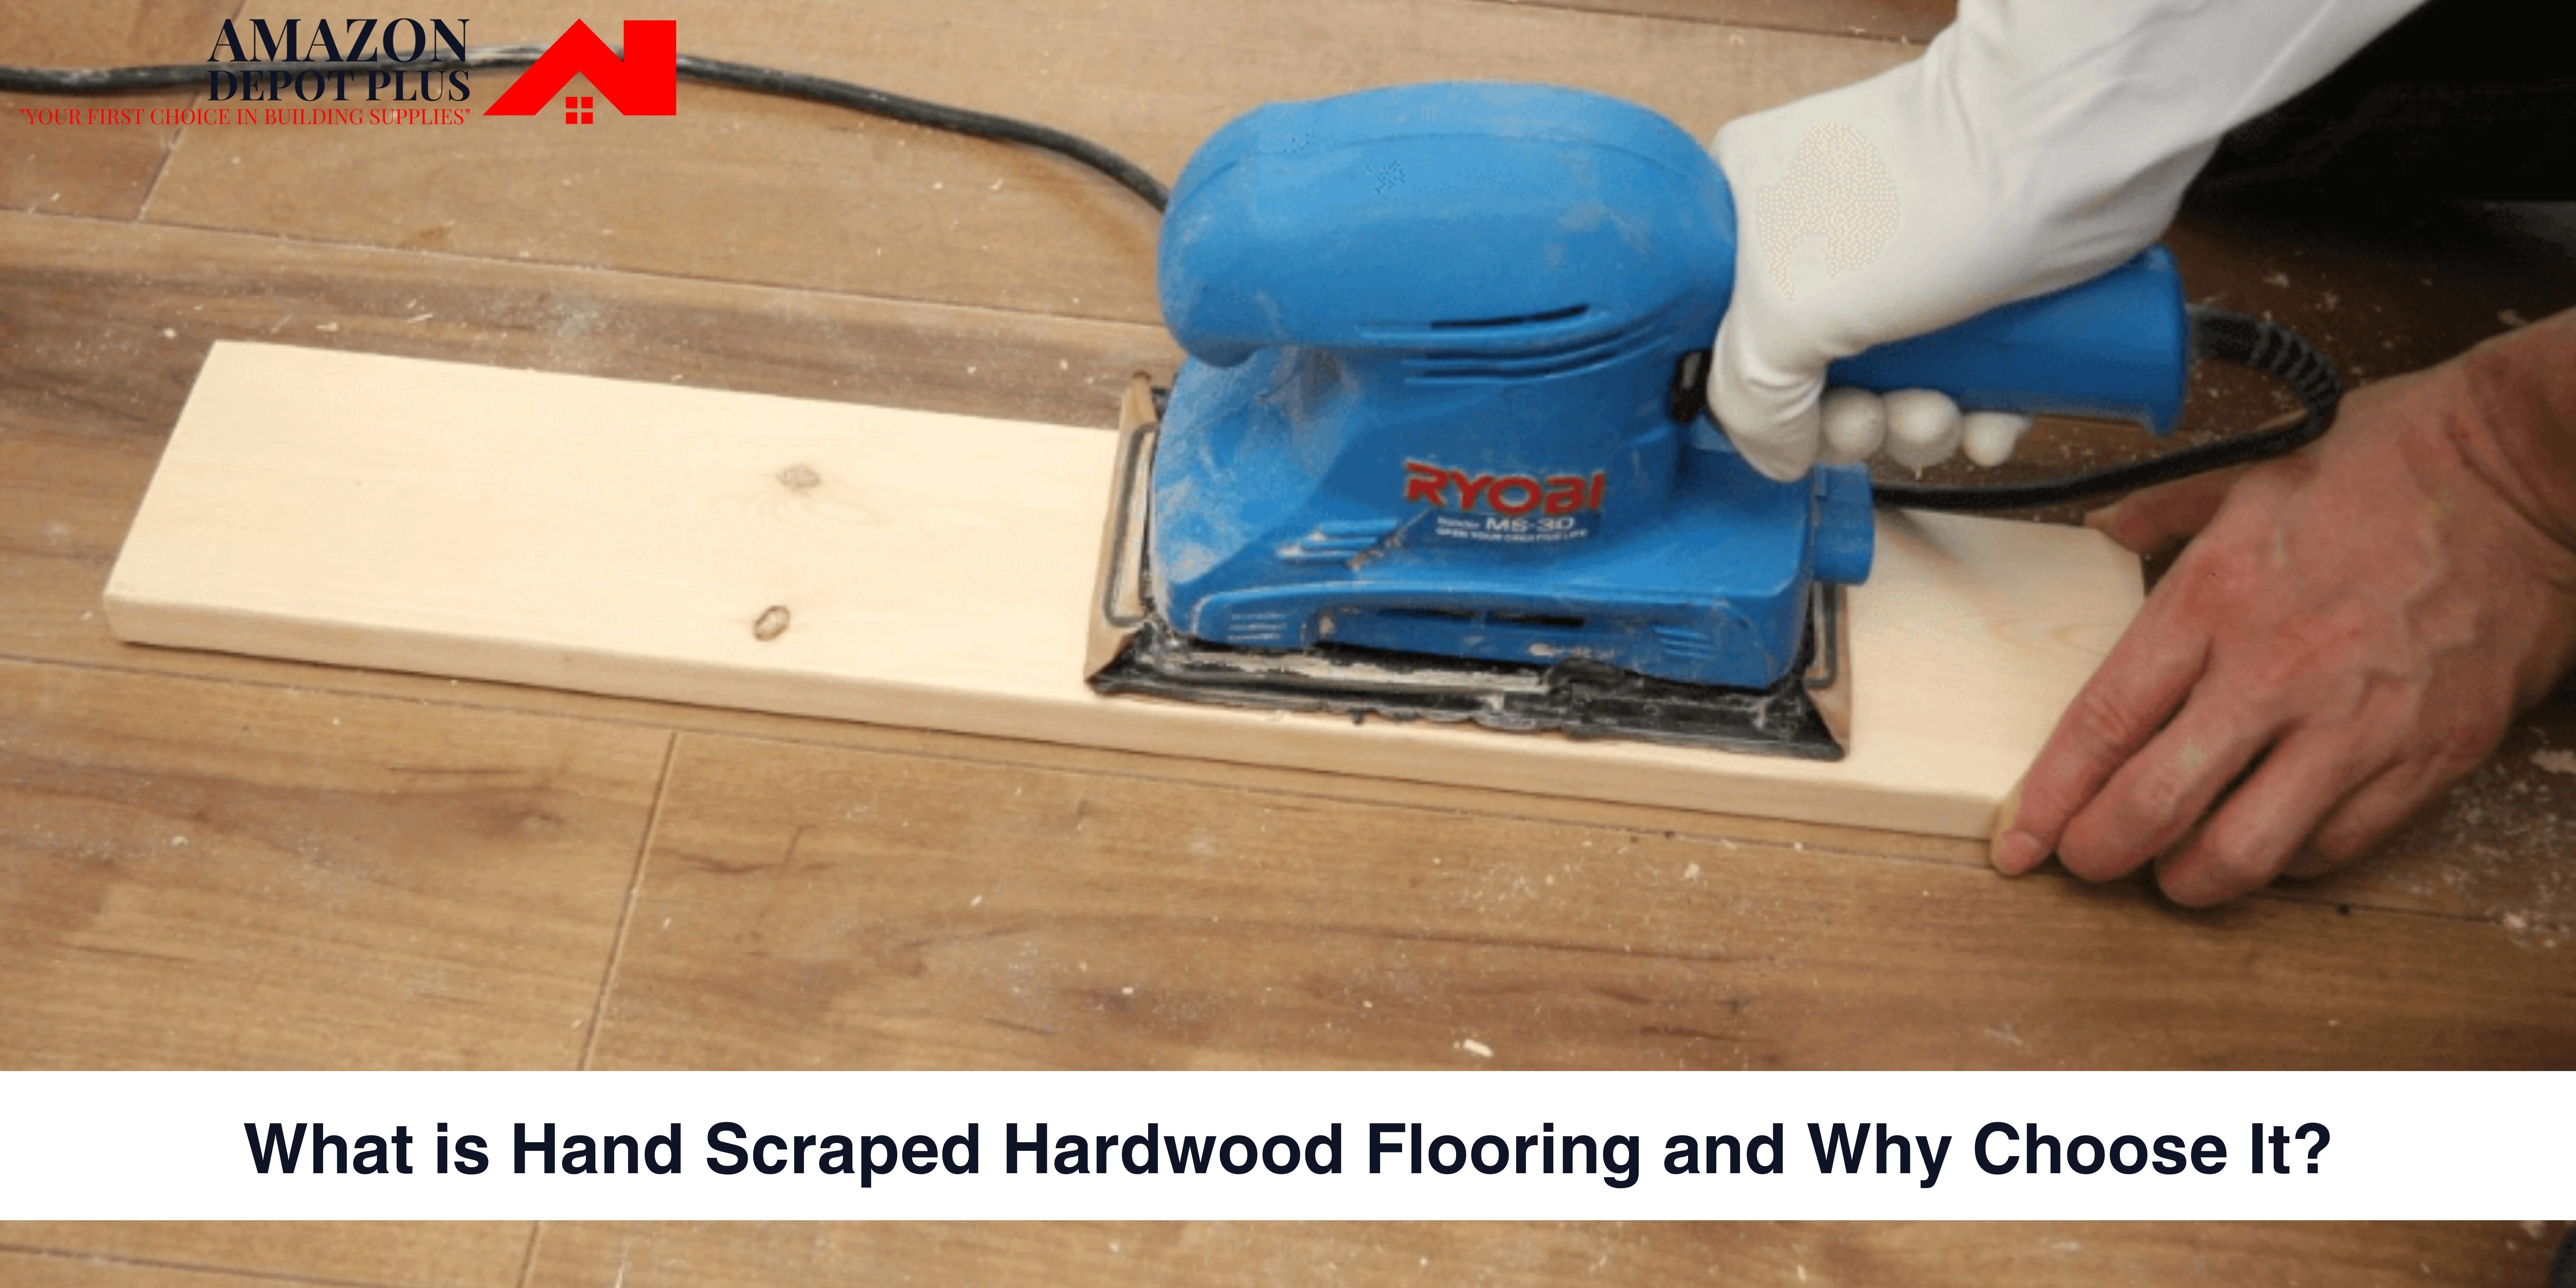 What is Hand Scraped Hardwood Flooring and Why Choose It?